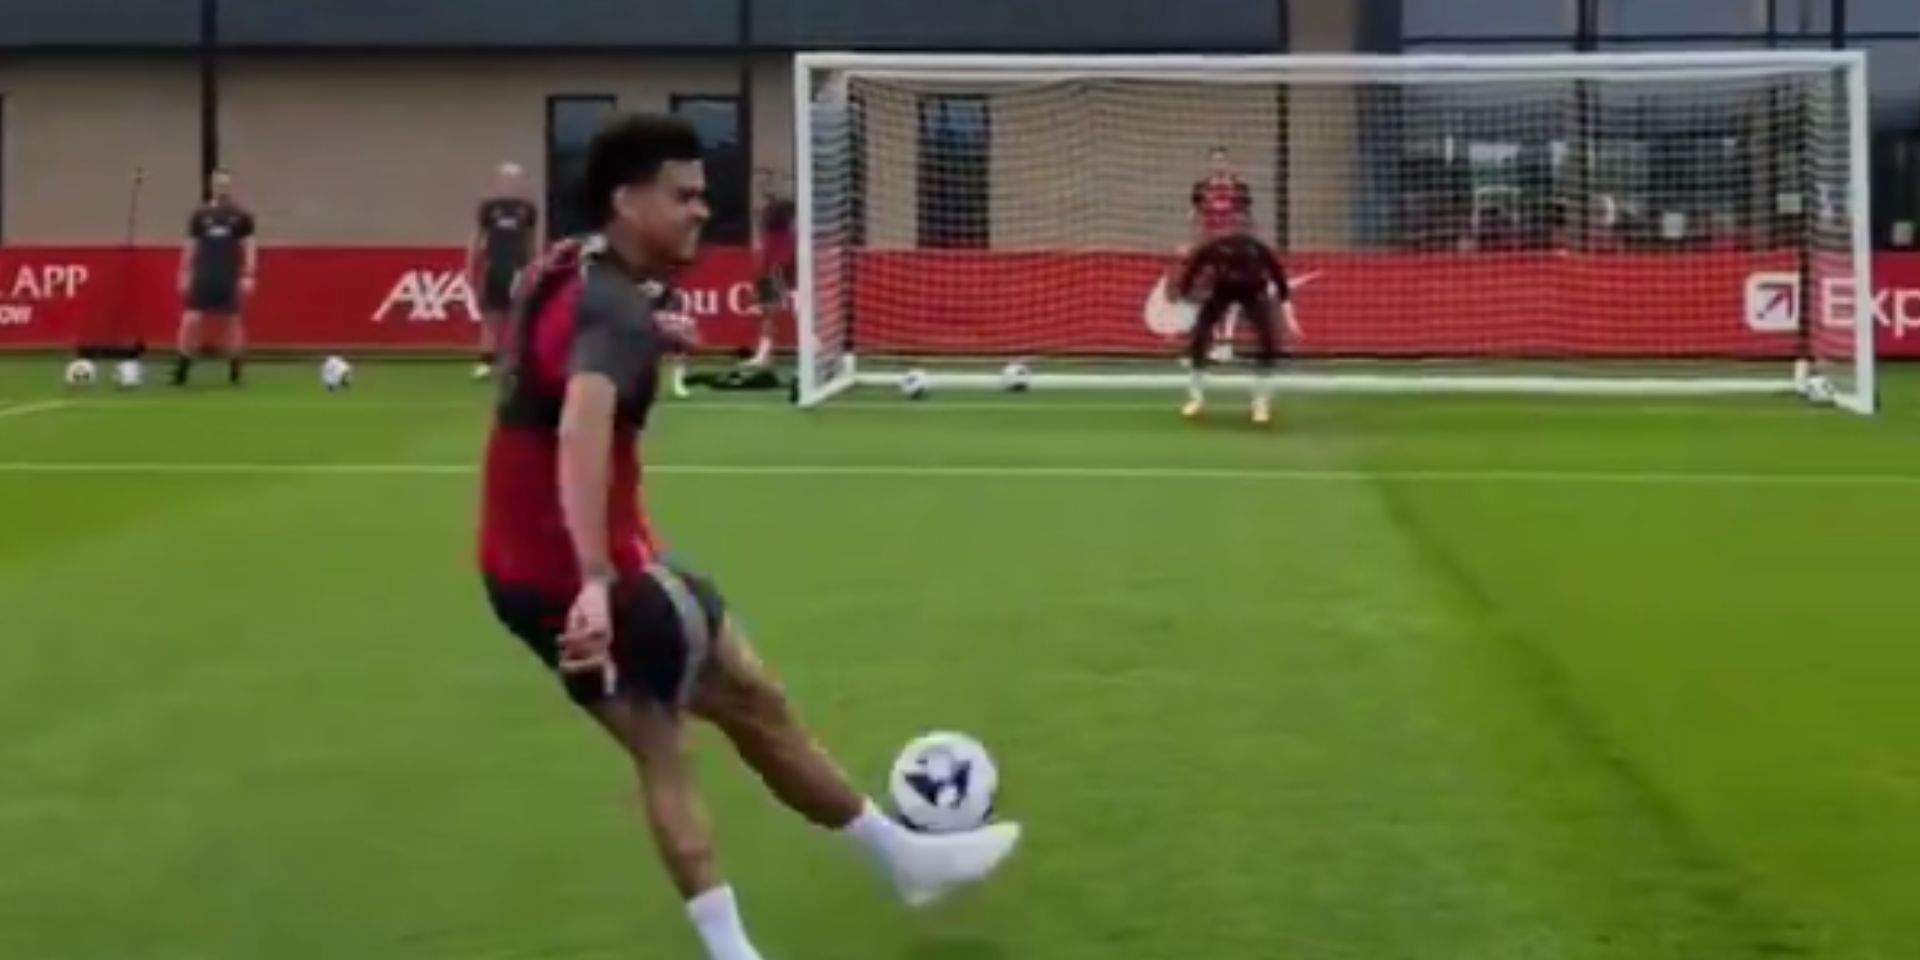 (Video) Gakpo in goal can’t stop Diaz’s no-look effort in brilliant training moment